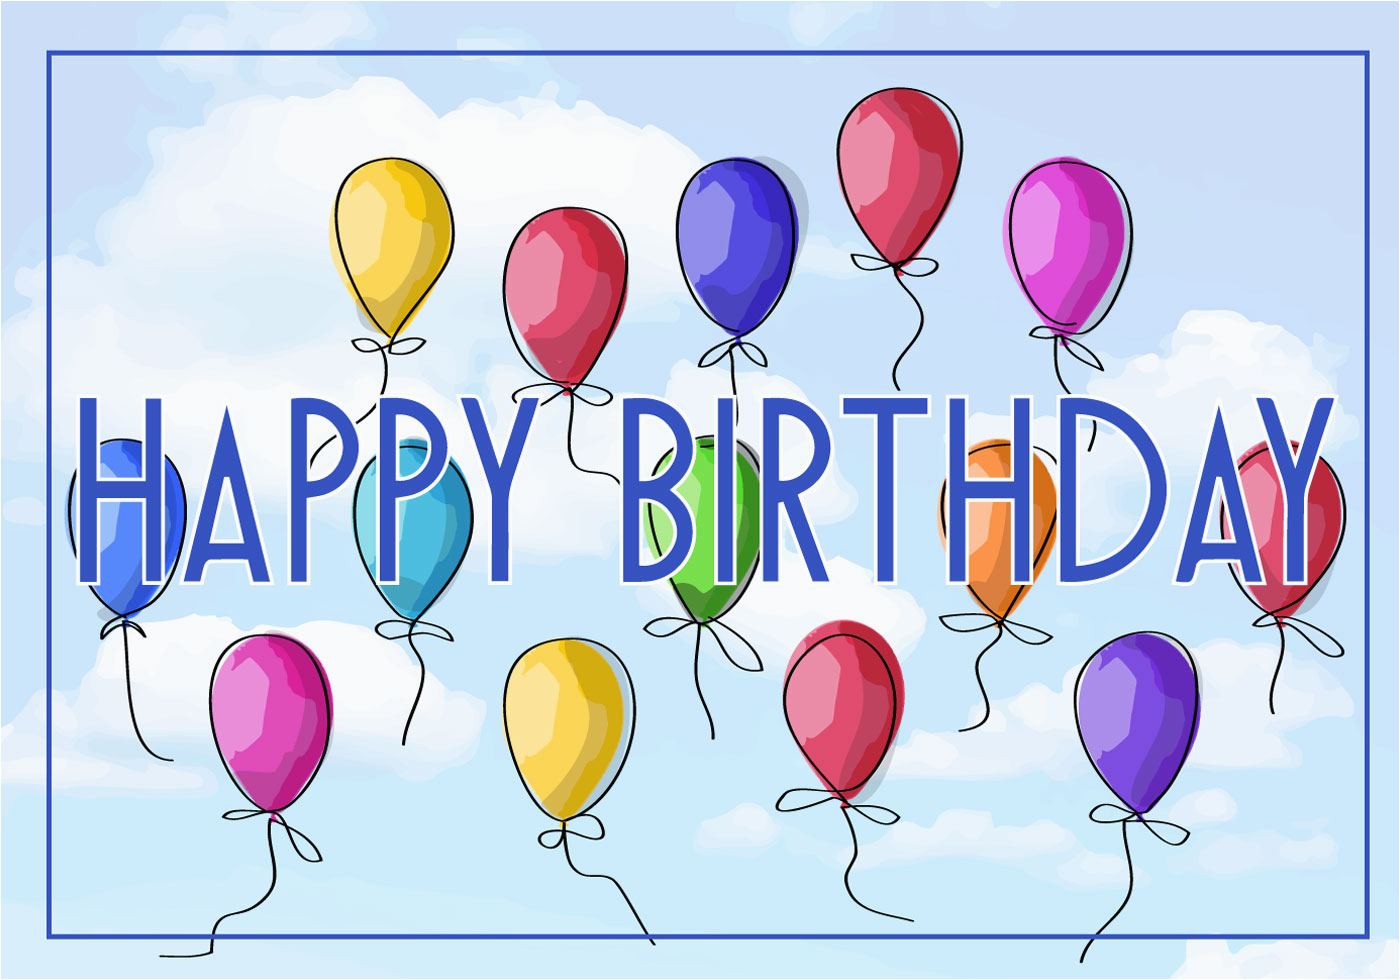 Free Birthday Cards Images and Graphics Free Vector Illustration Of A Happy Birthday Greeting Card